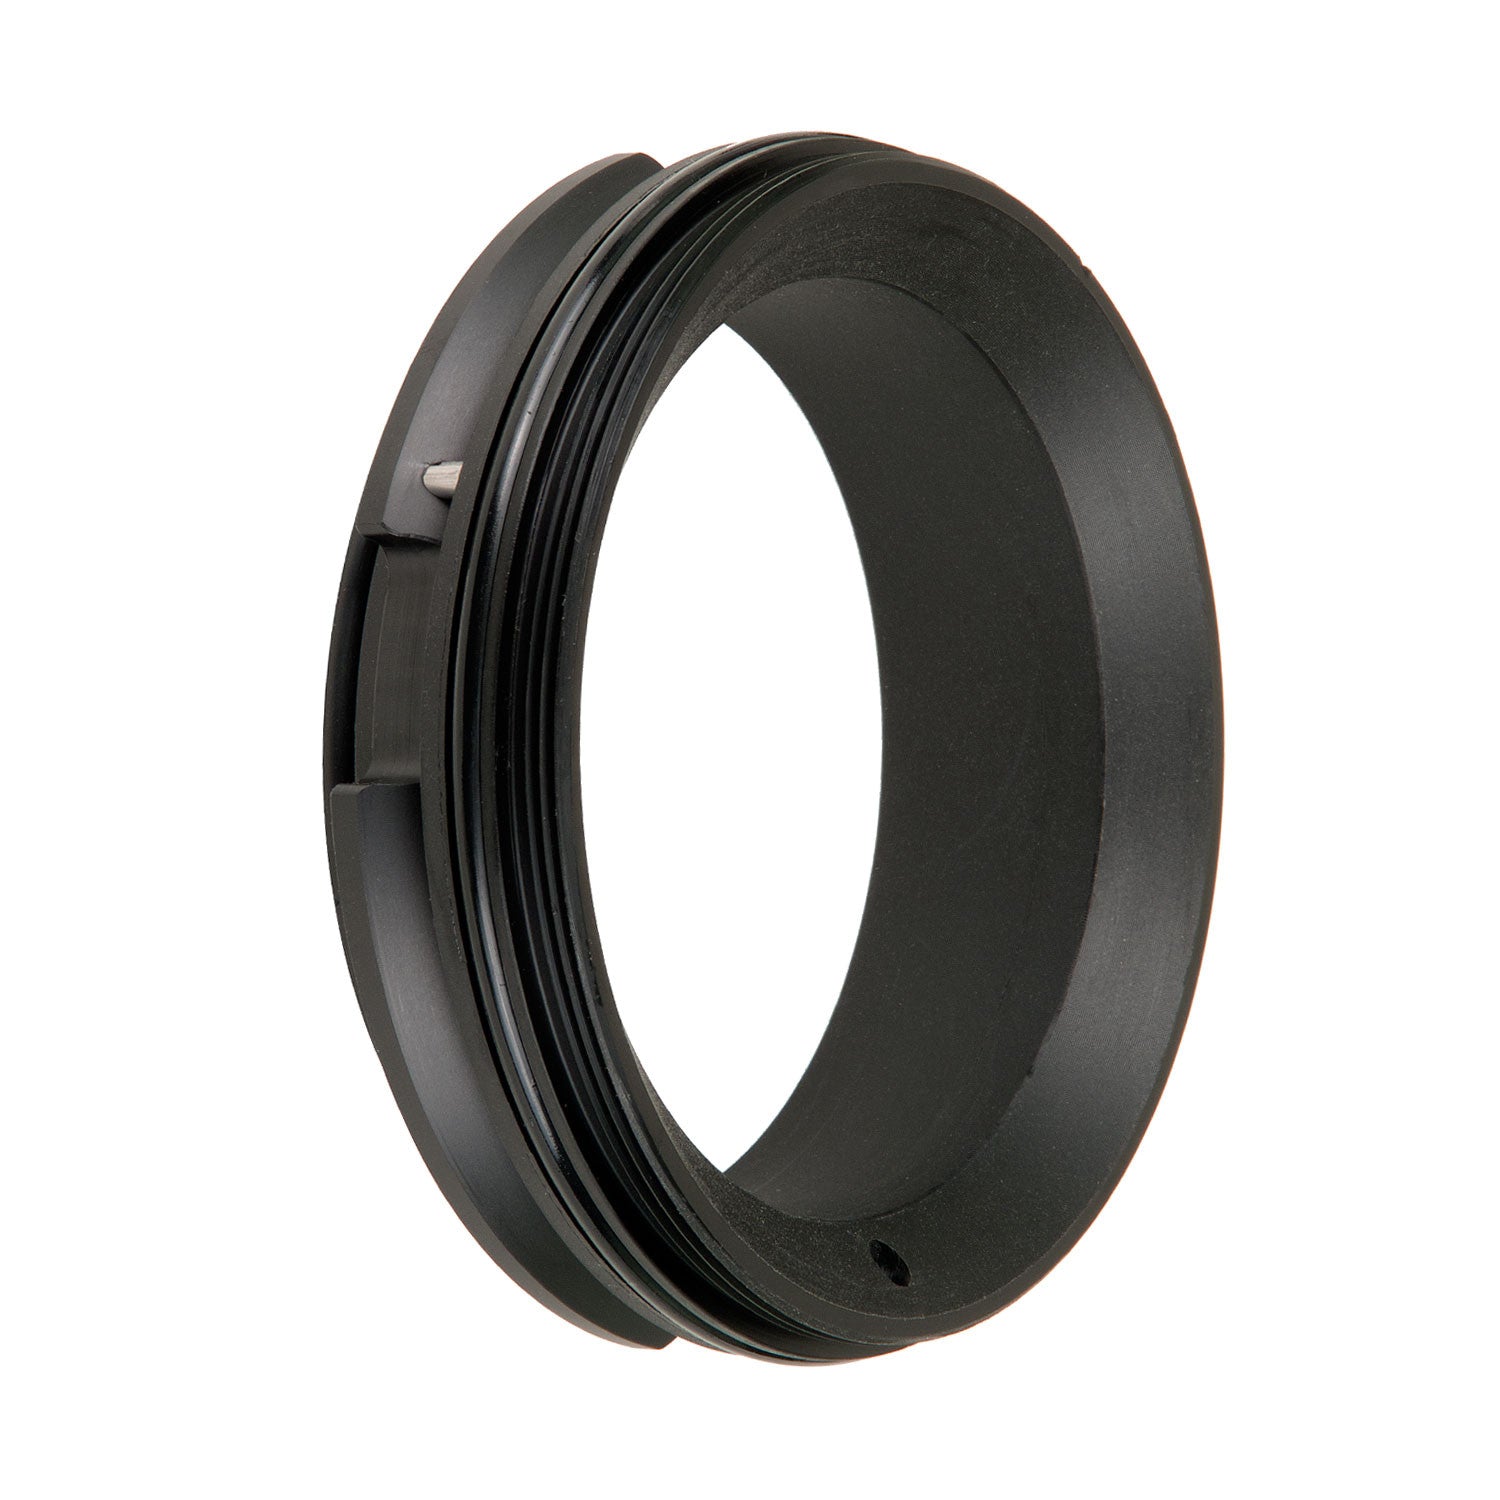 FL Extension for Lenses Up To 2.75 Inches